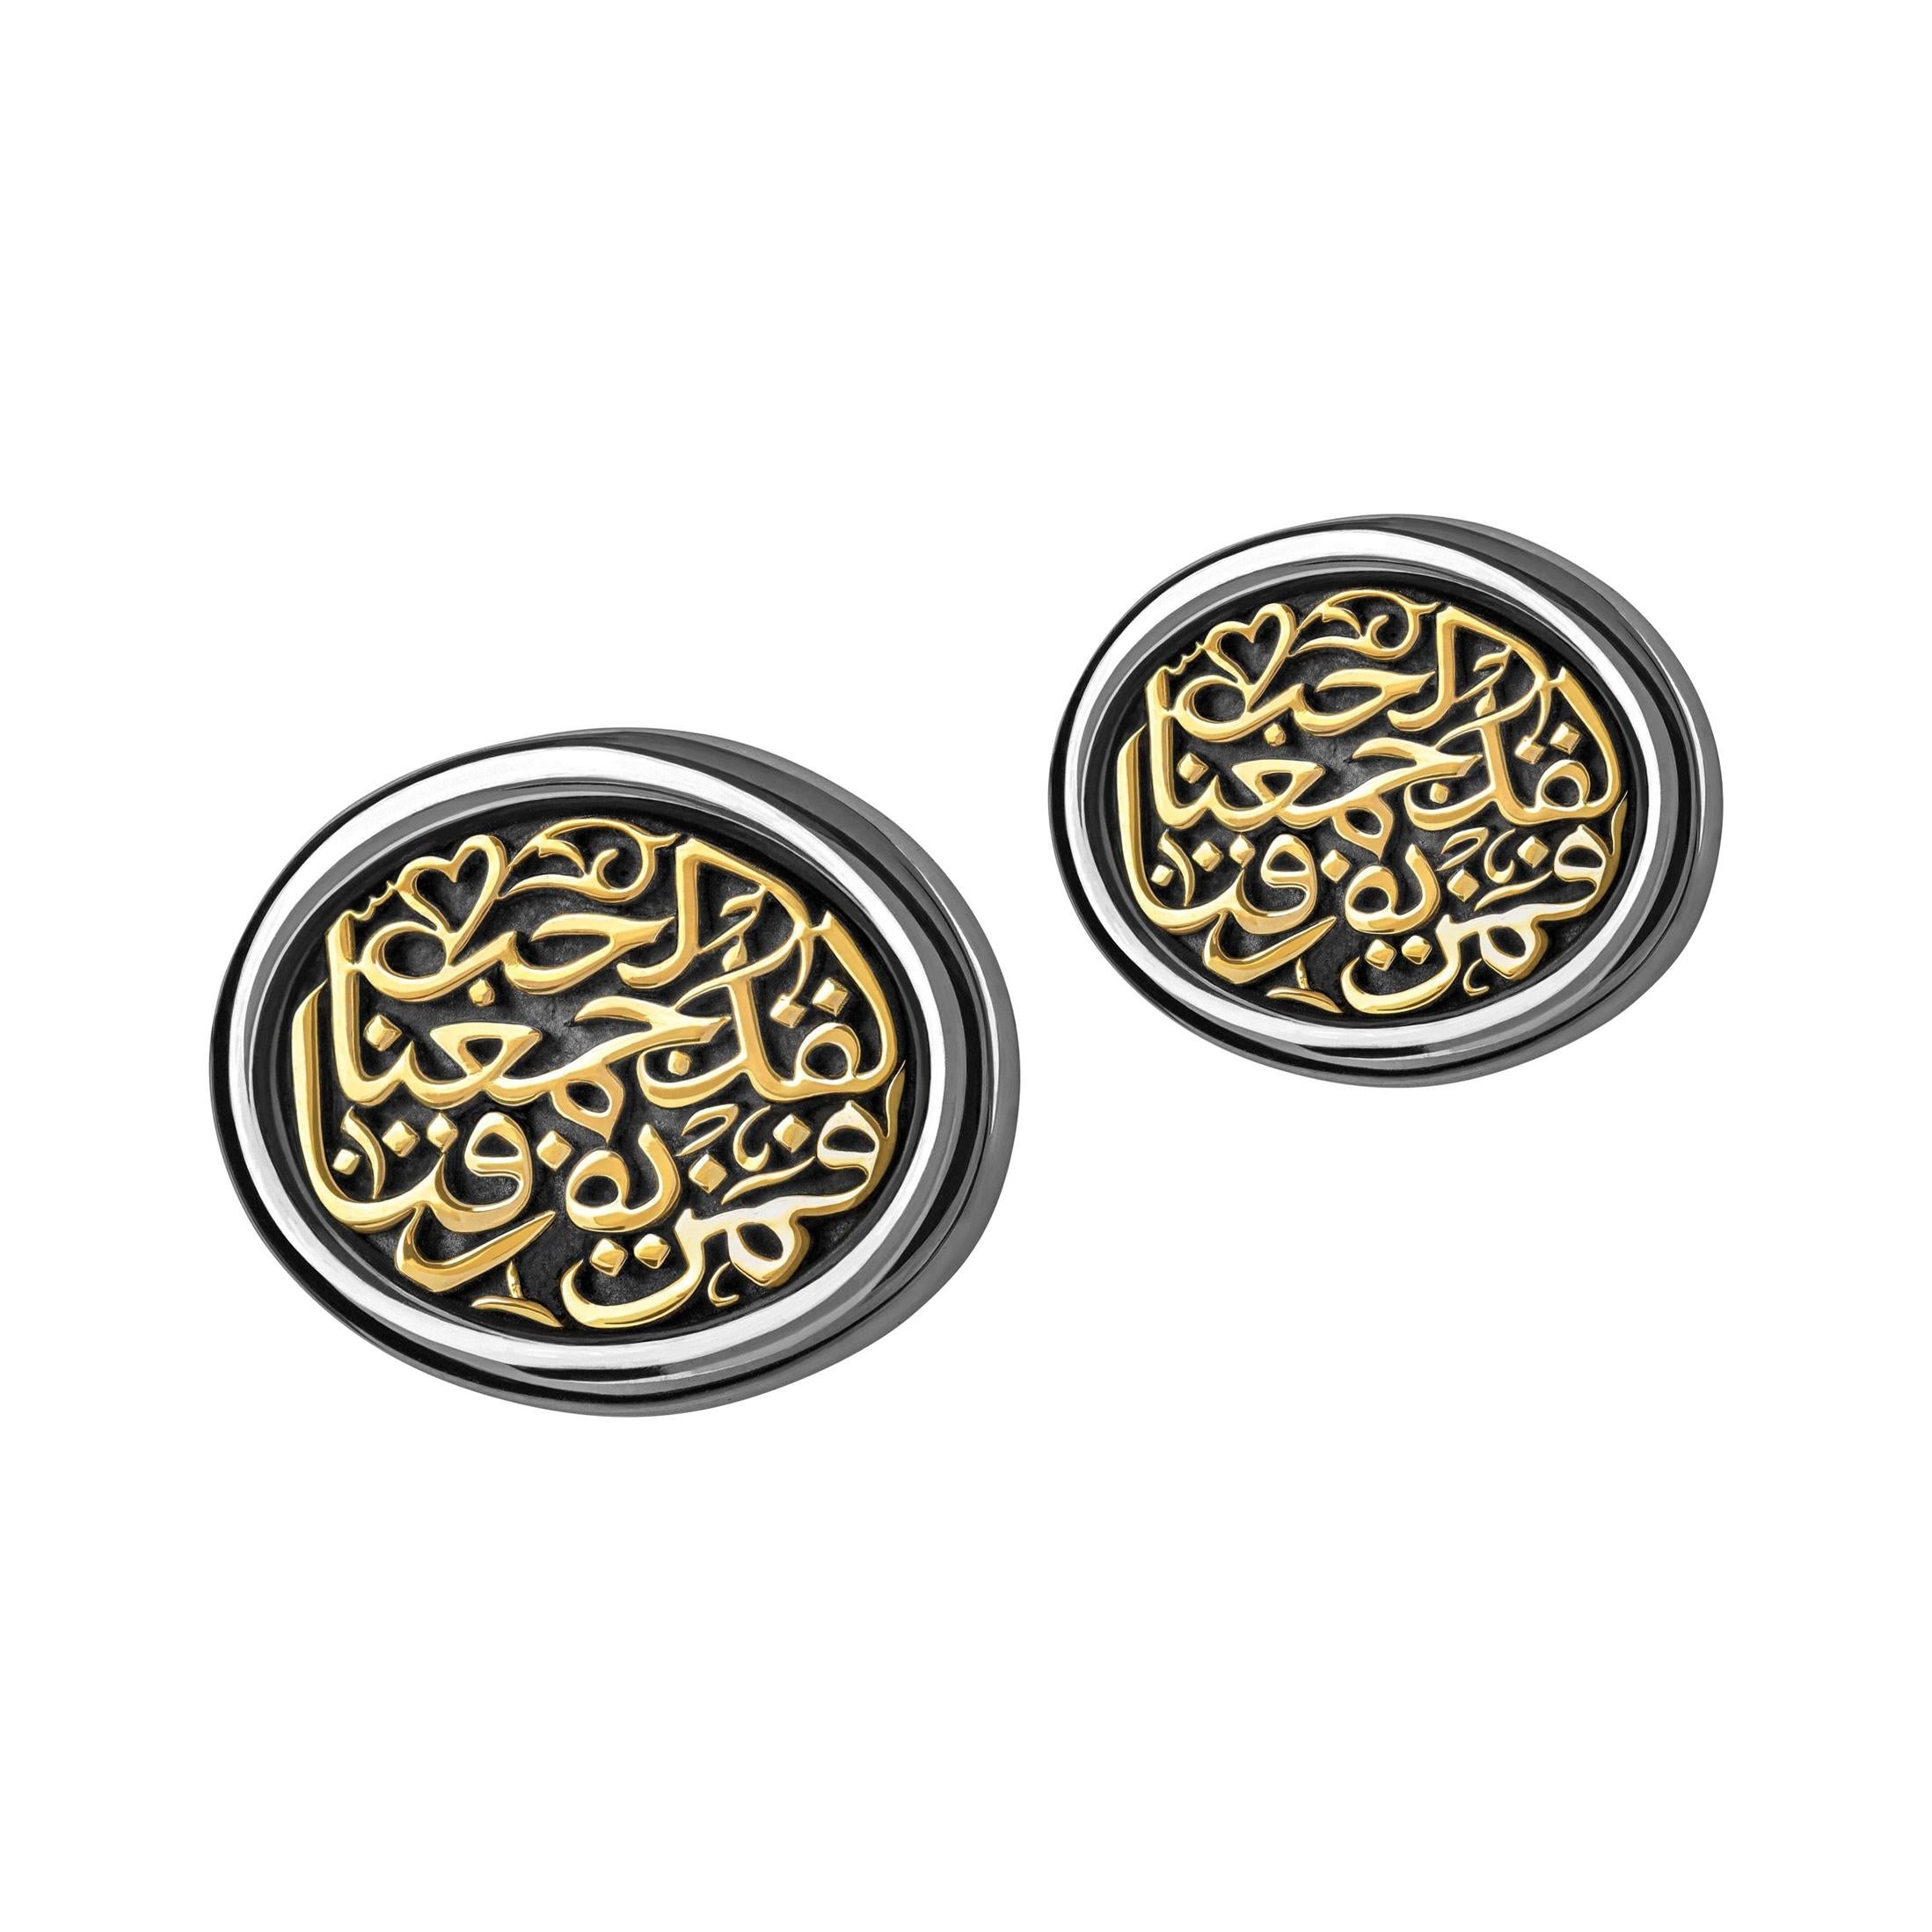 18 Karat Gold and Sterling Silver "Love" Classic Calligraphy Button Earrings For Sale